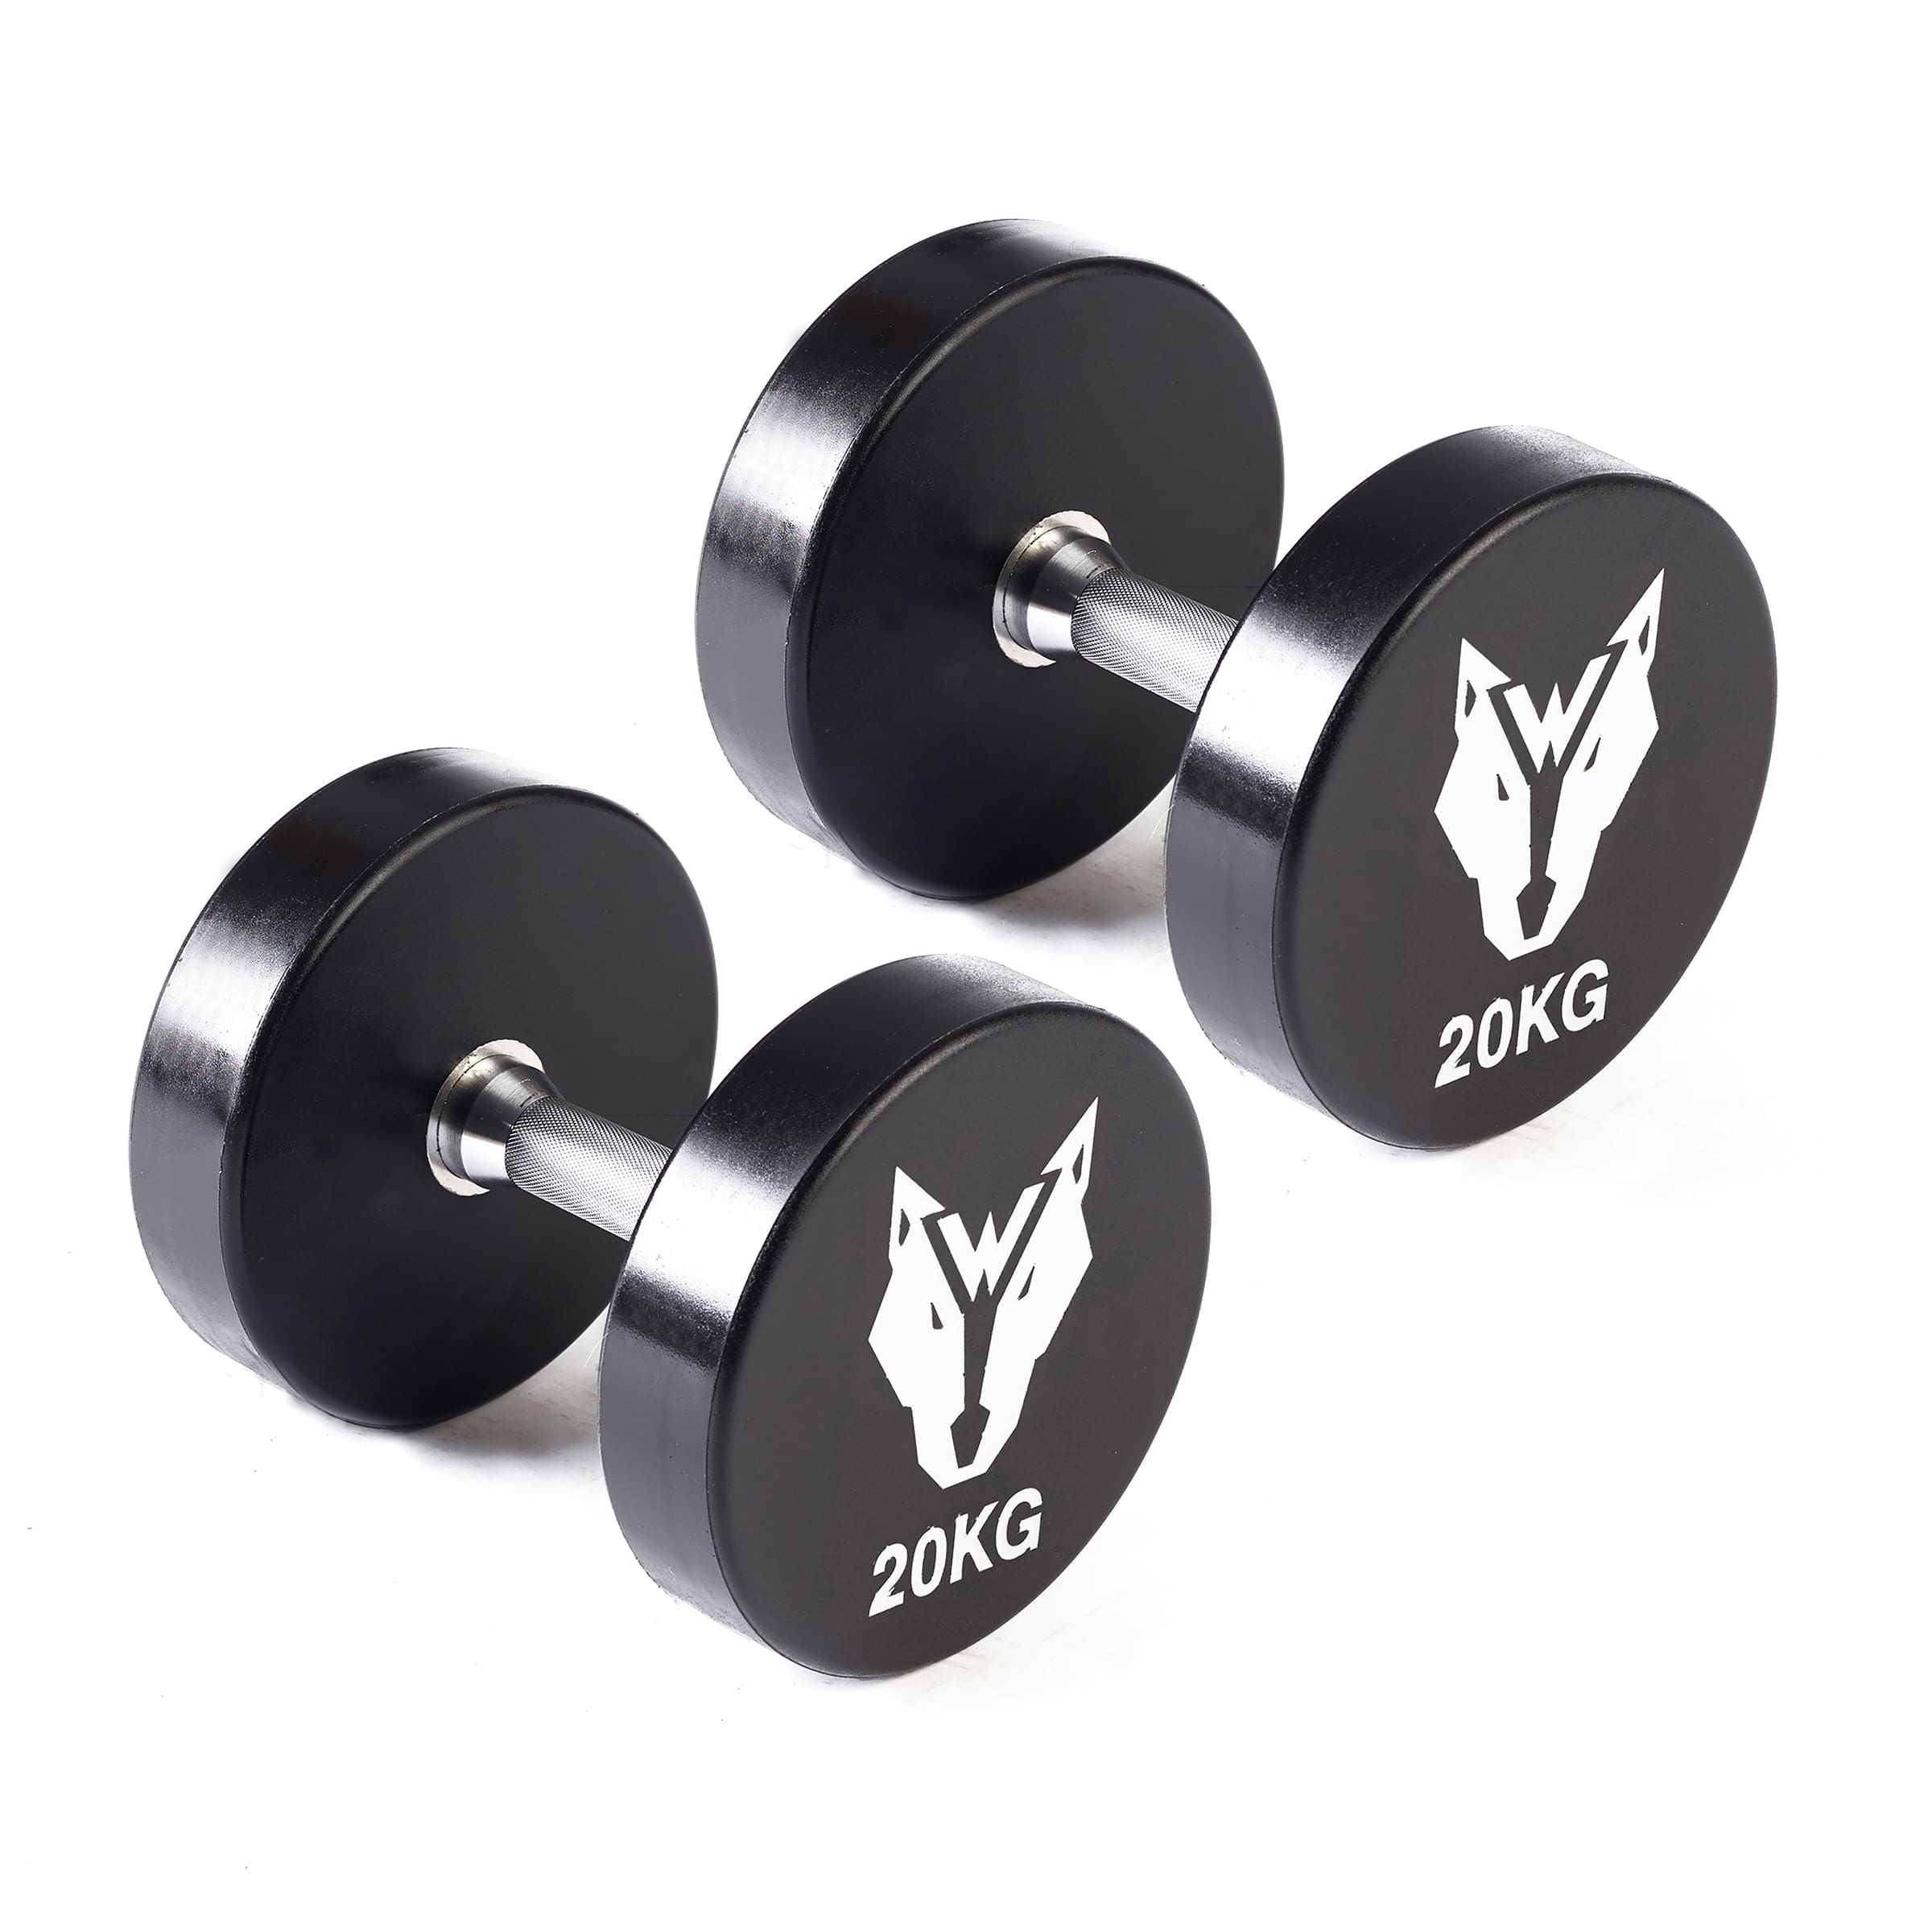 Wolverson PU Dumbbell 30 Pair Set With Rack